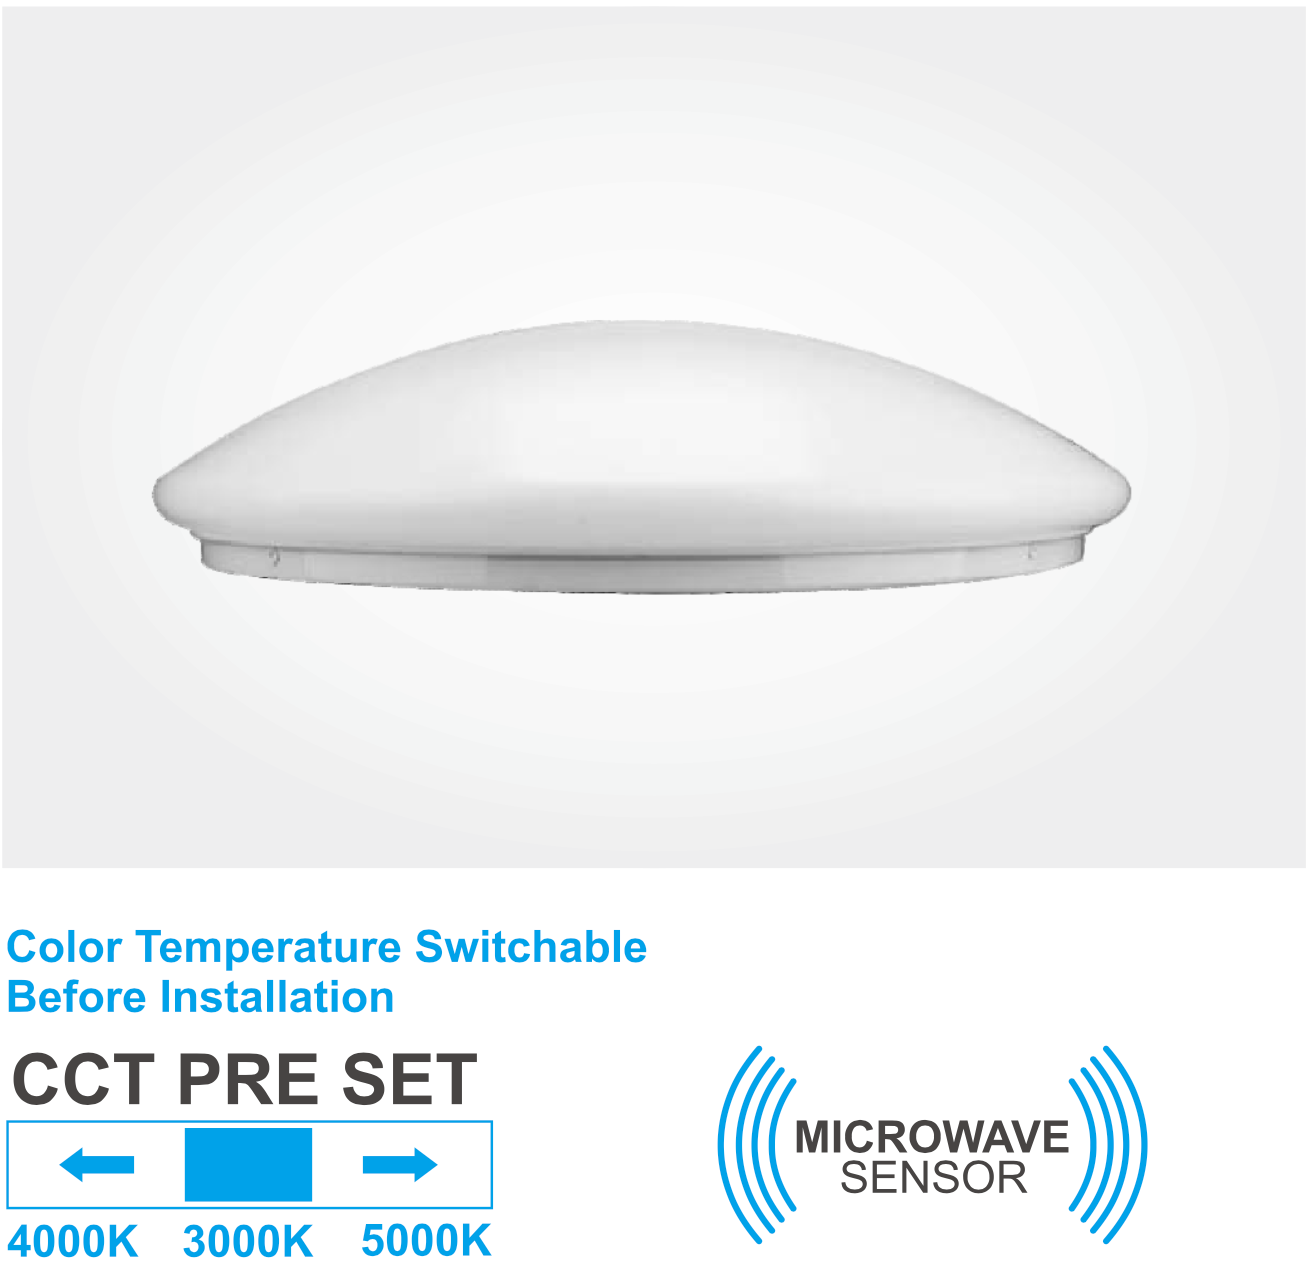 30w LED Oyster Light with Dimmable Microwave Sensor (TRI COLOUR) - AC1012-30W